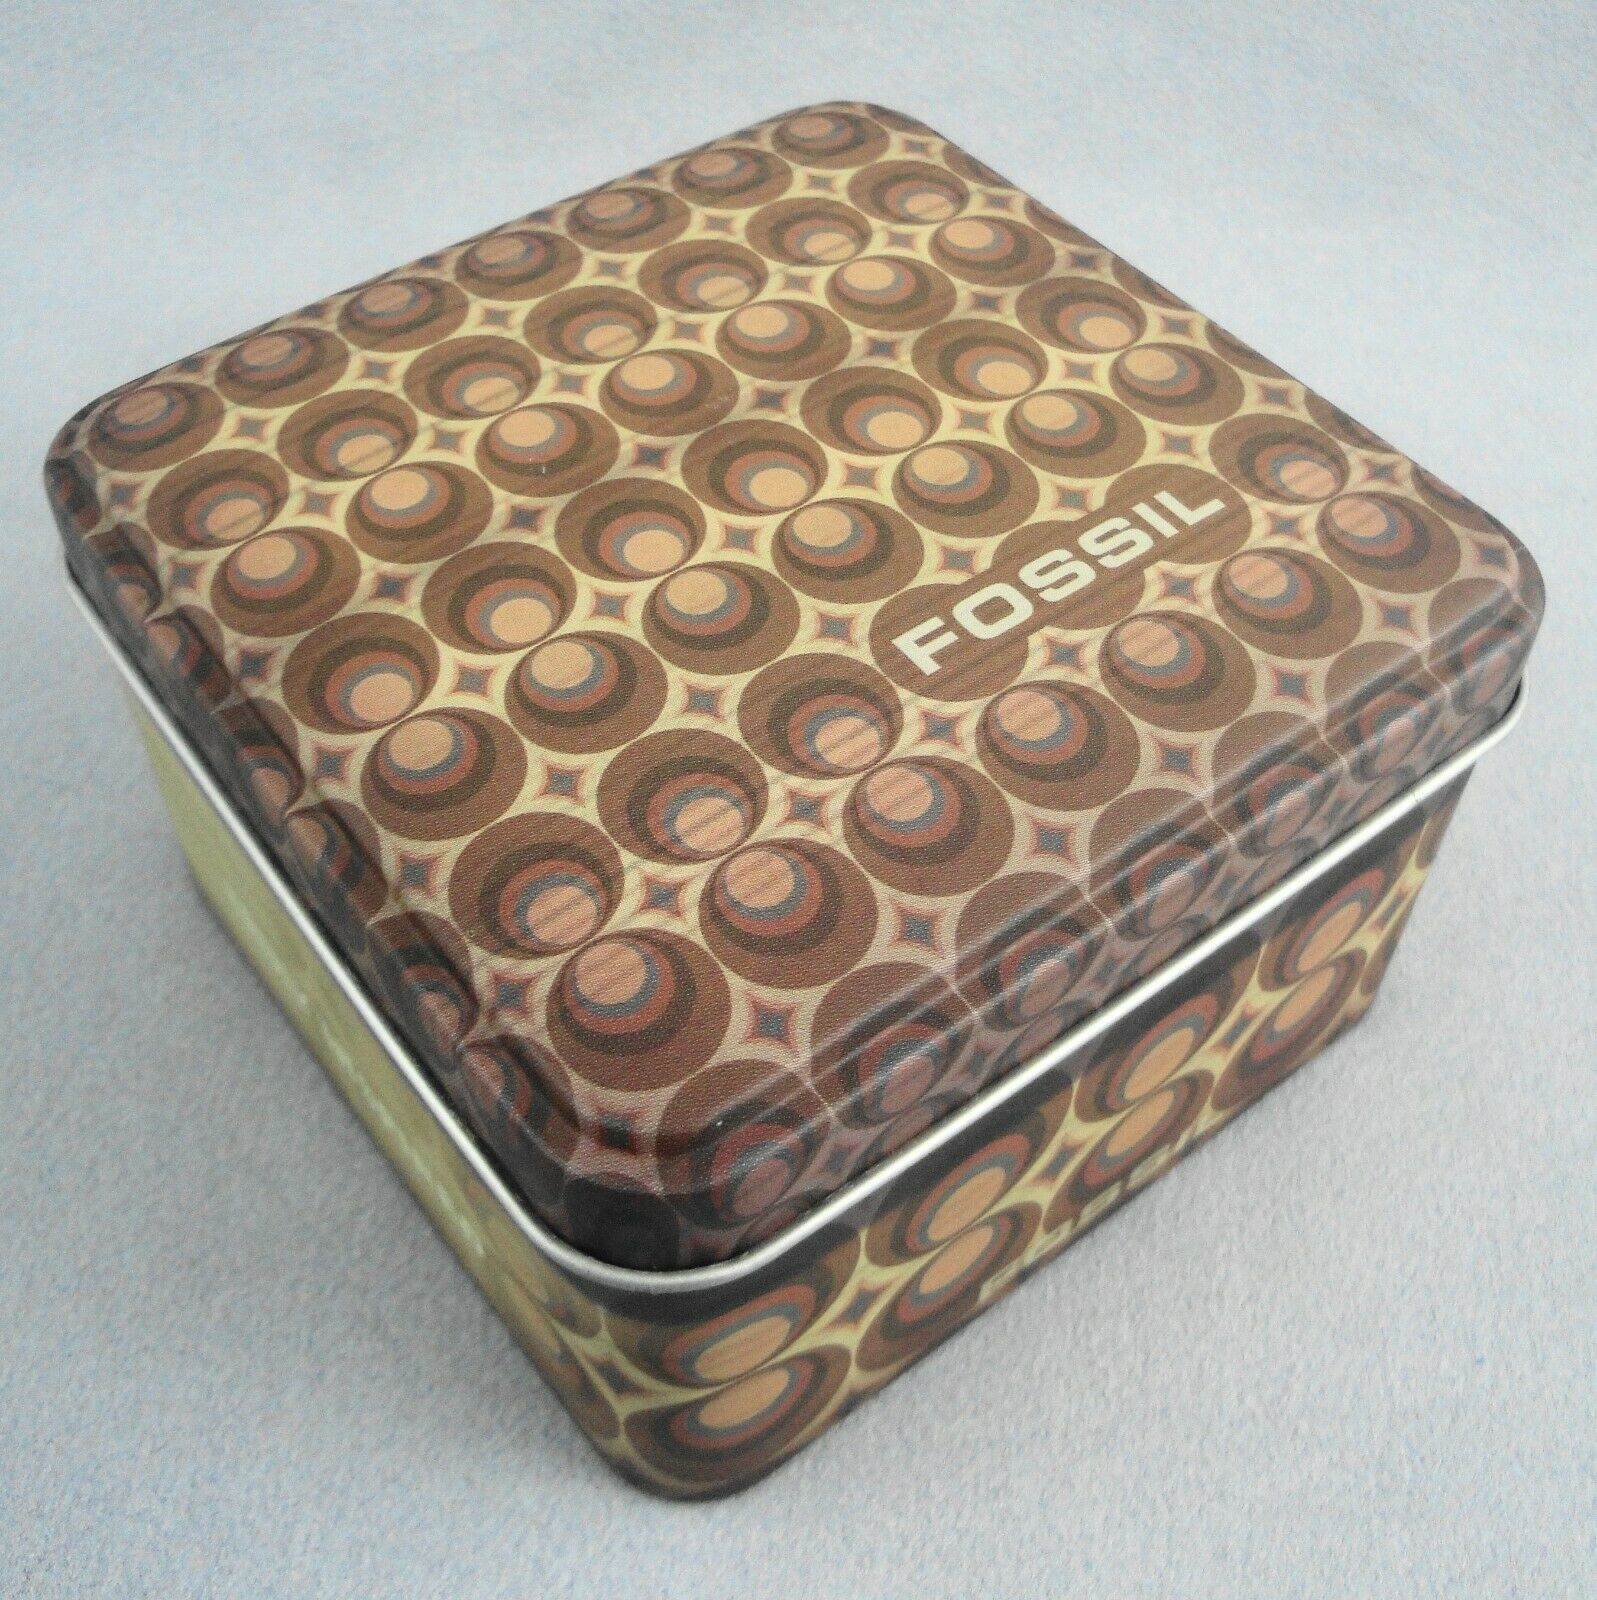 Fossil 2002 Empty Watch Tin Truly Inspired Geometric Circles Diamonds Brown Vtg - $5.87